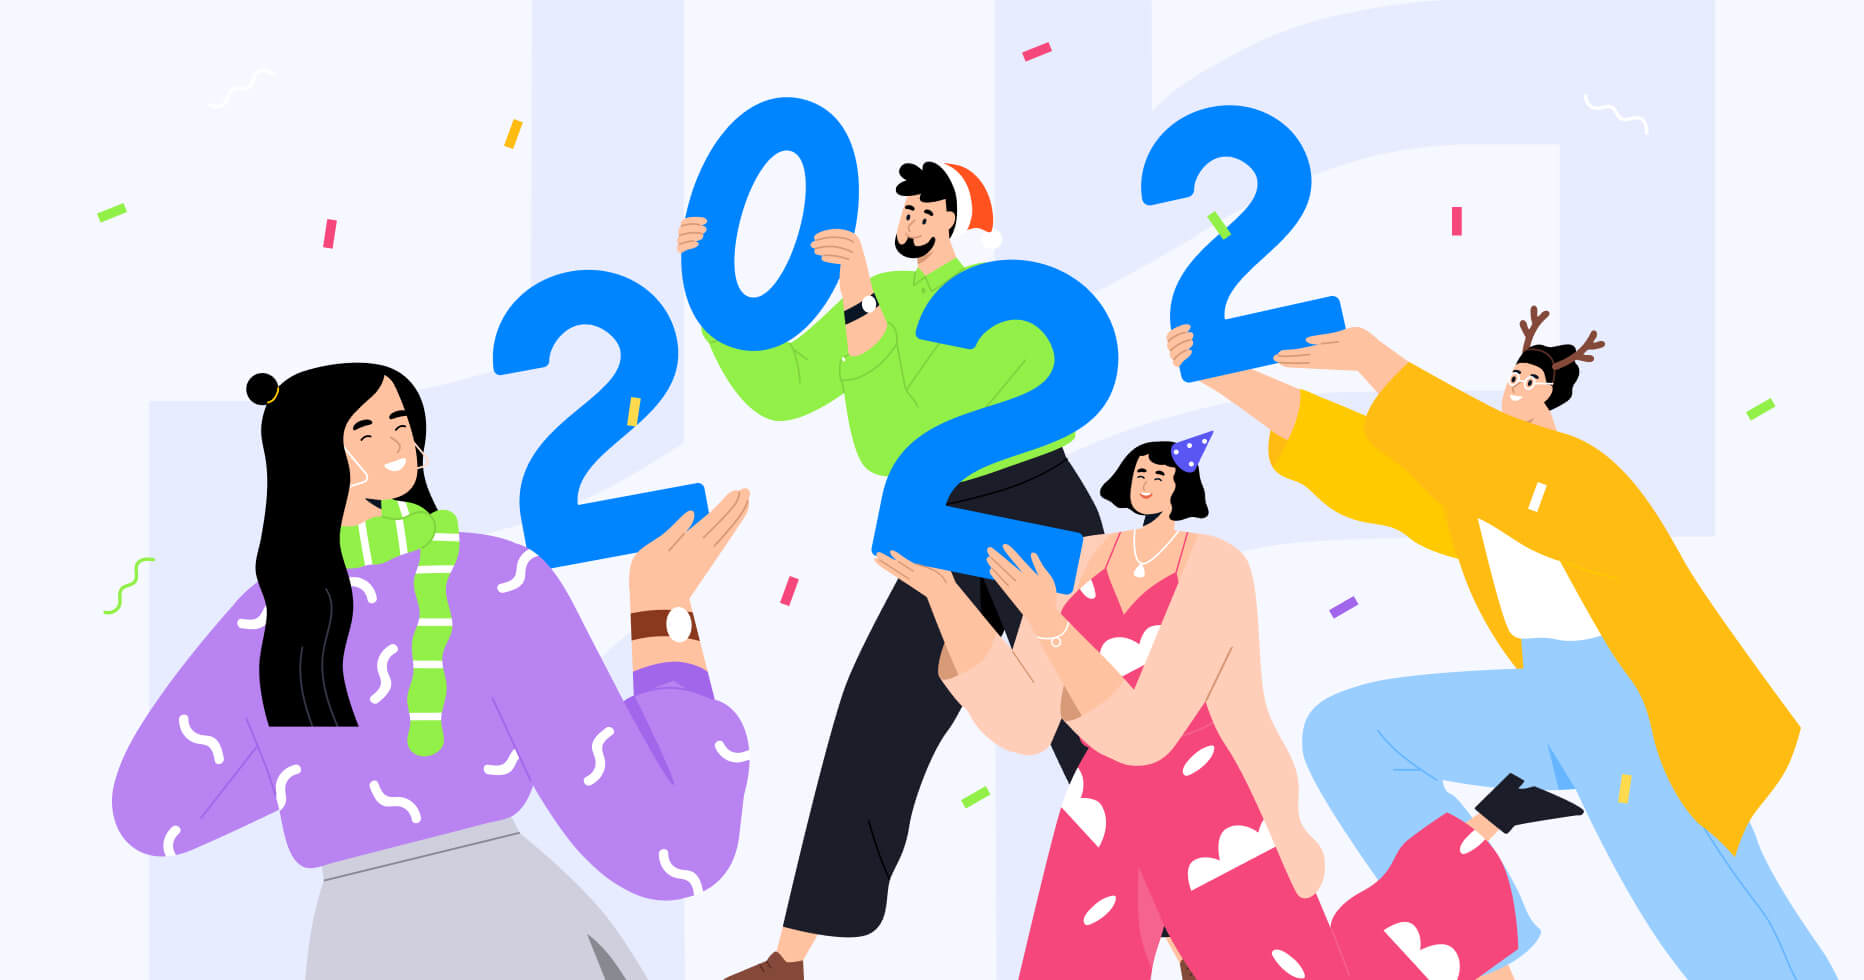 2021 in review at Travelpayouts